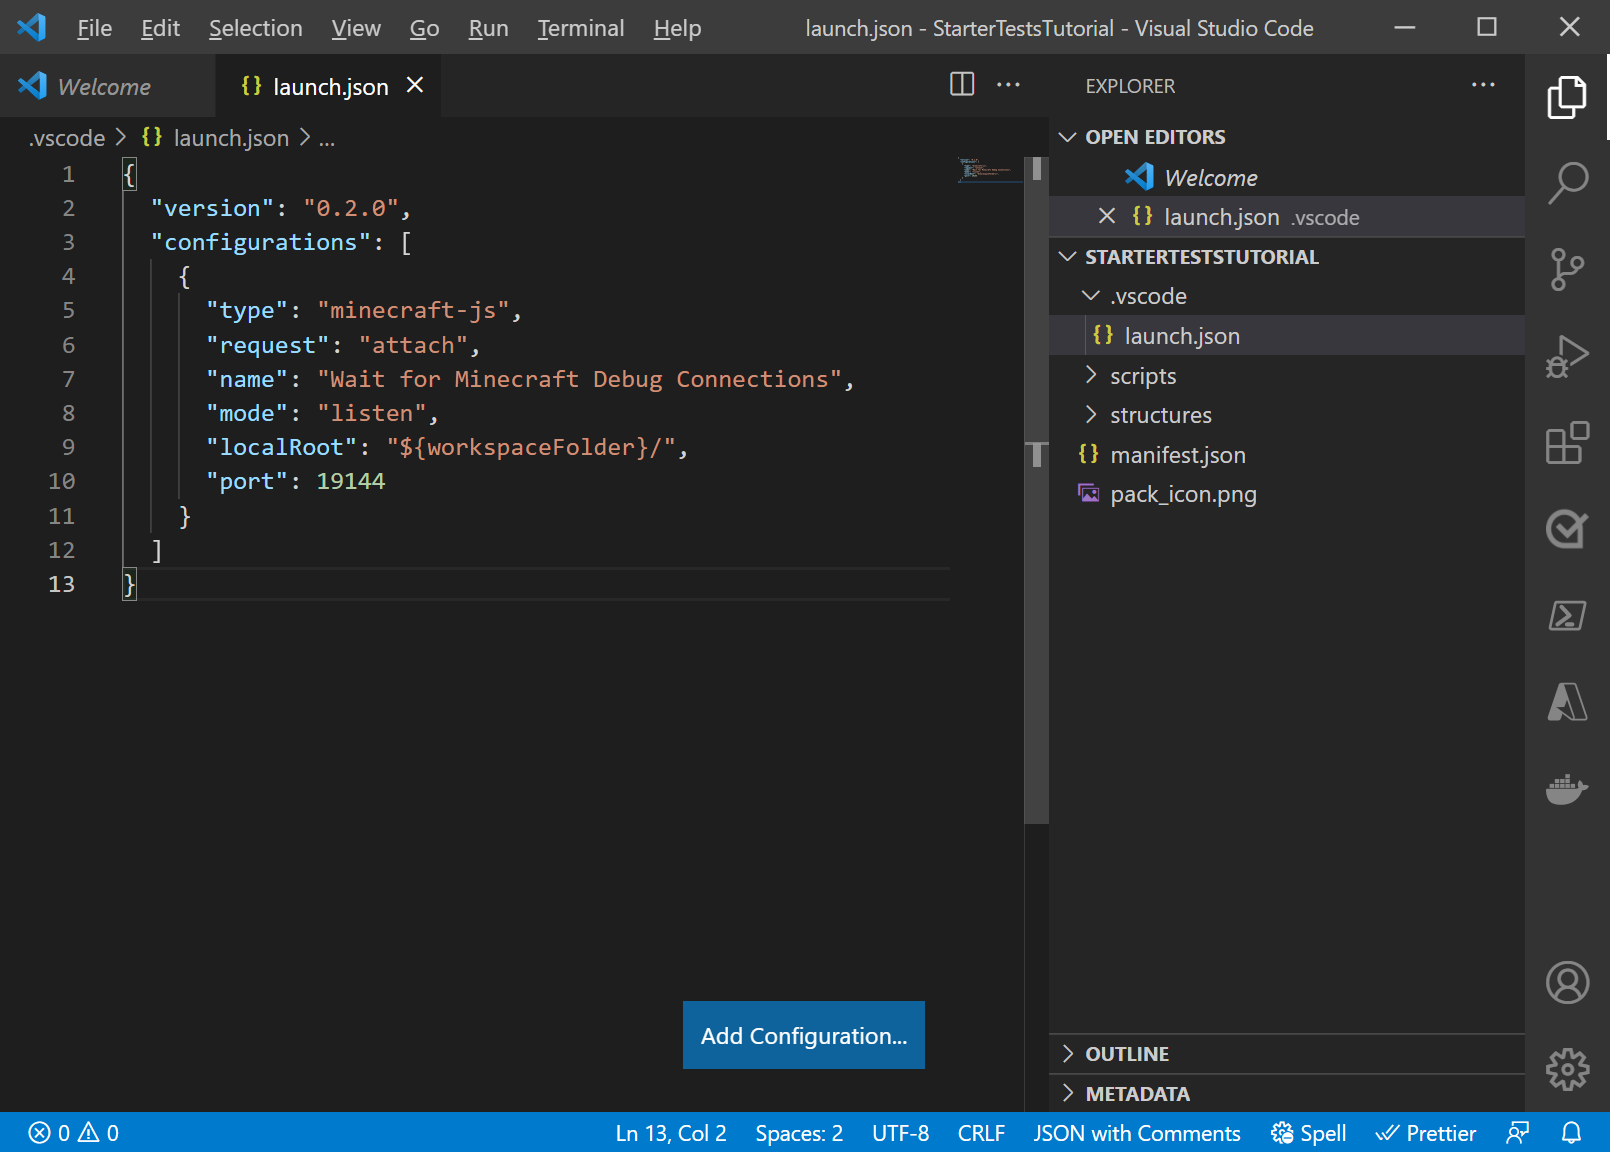 Visual Studio Code with launch.json